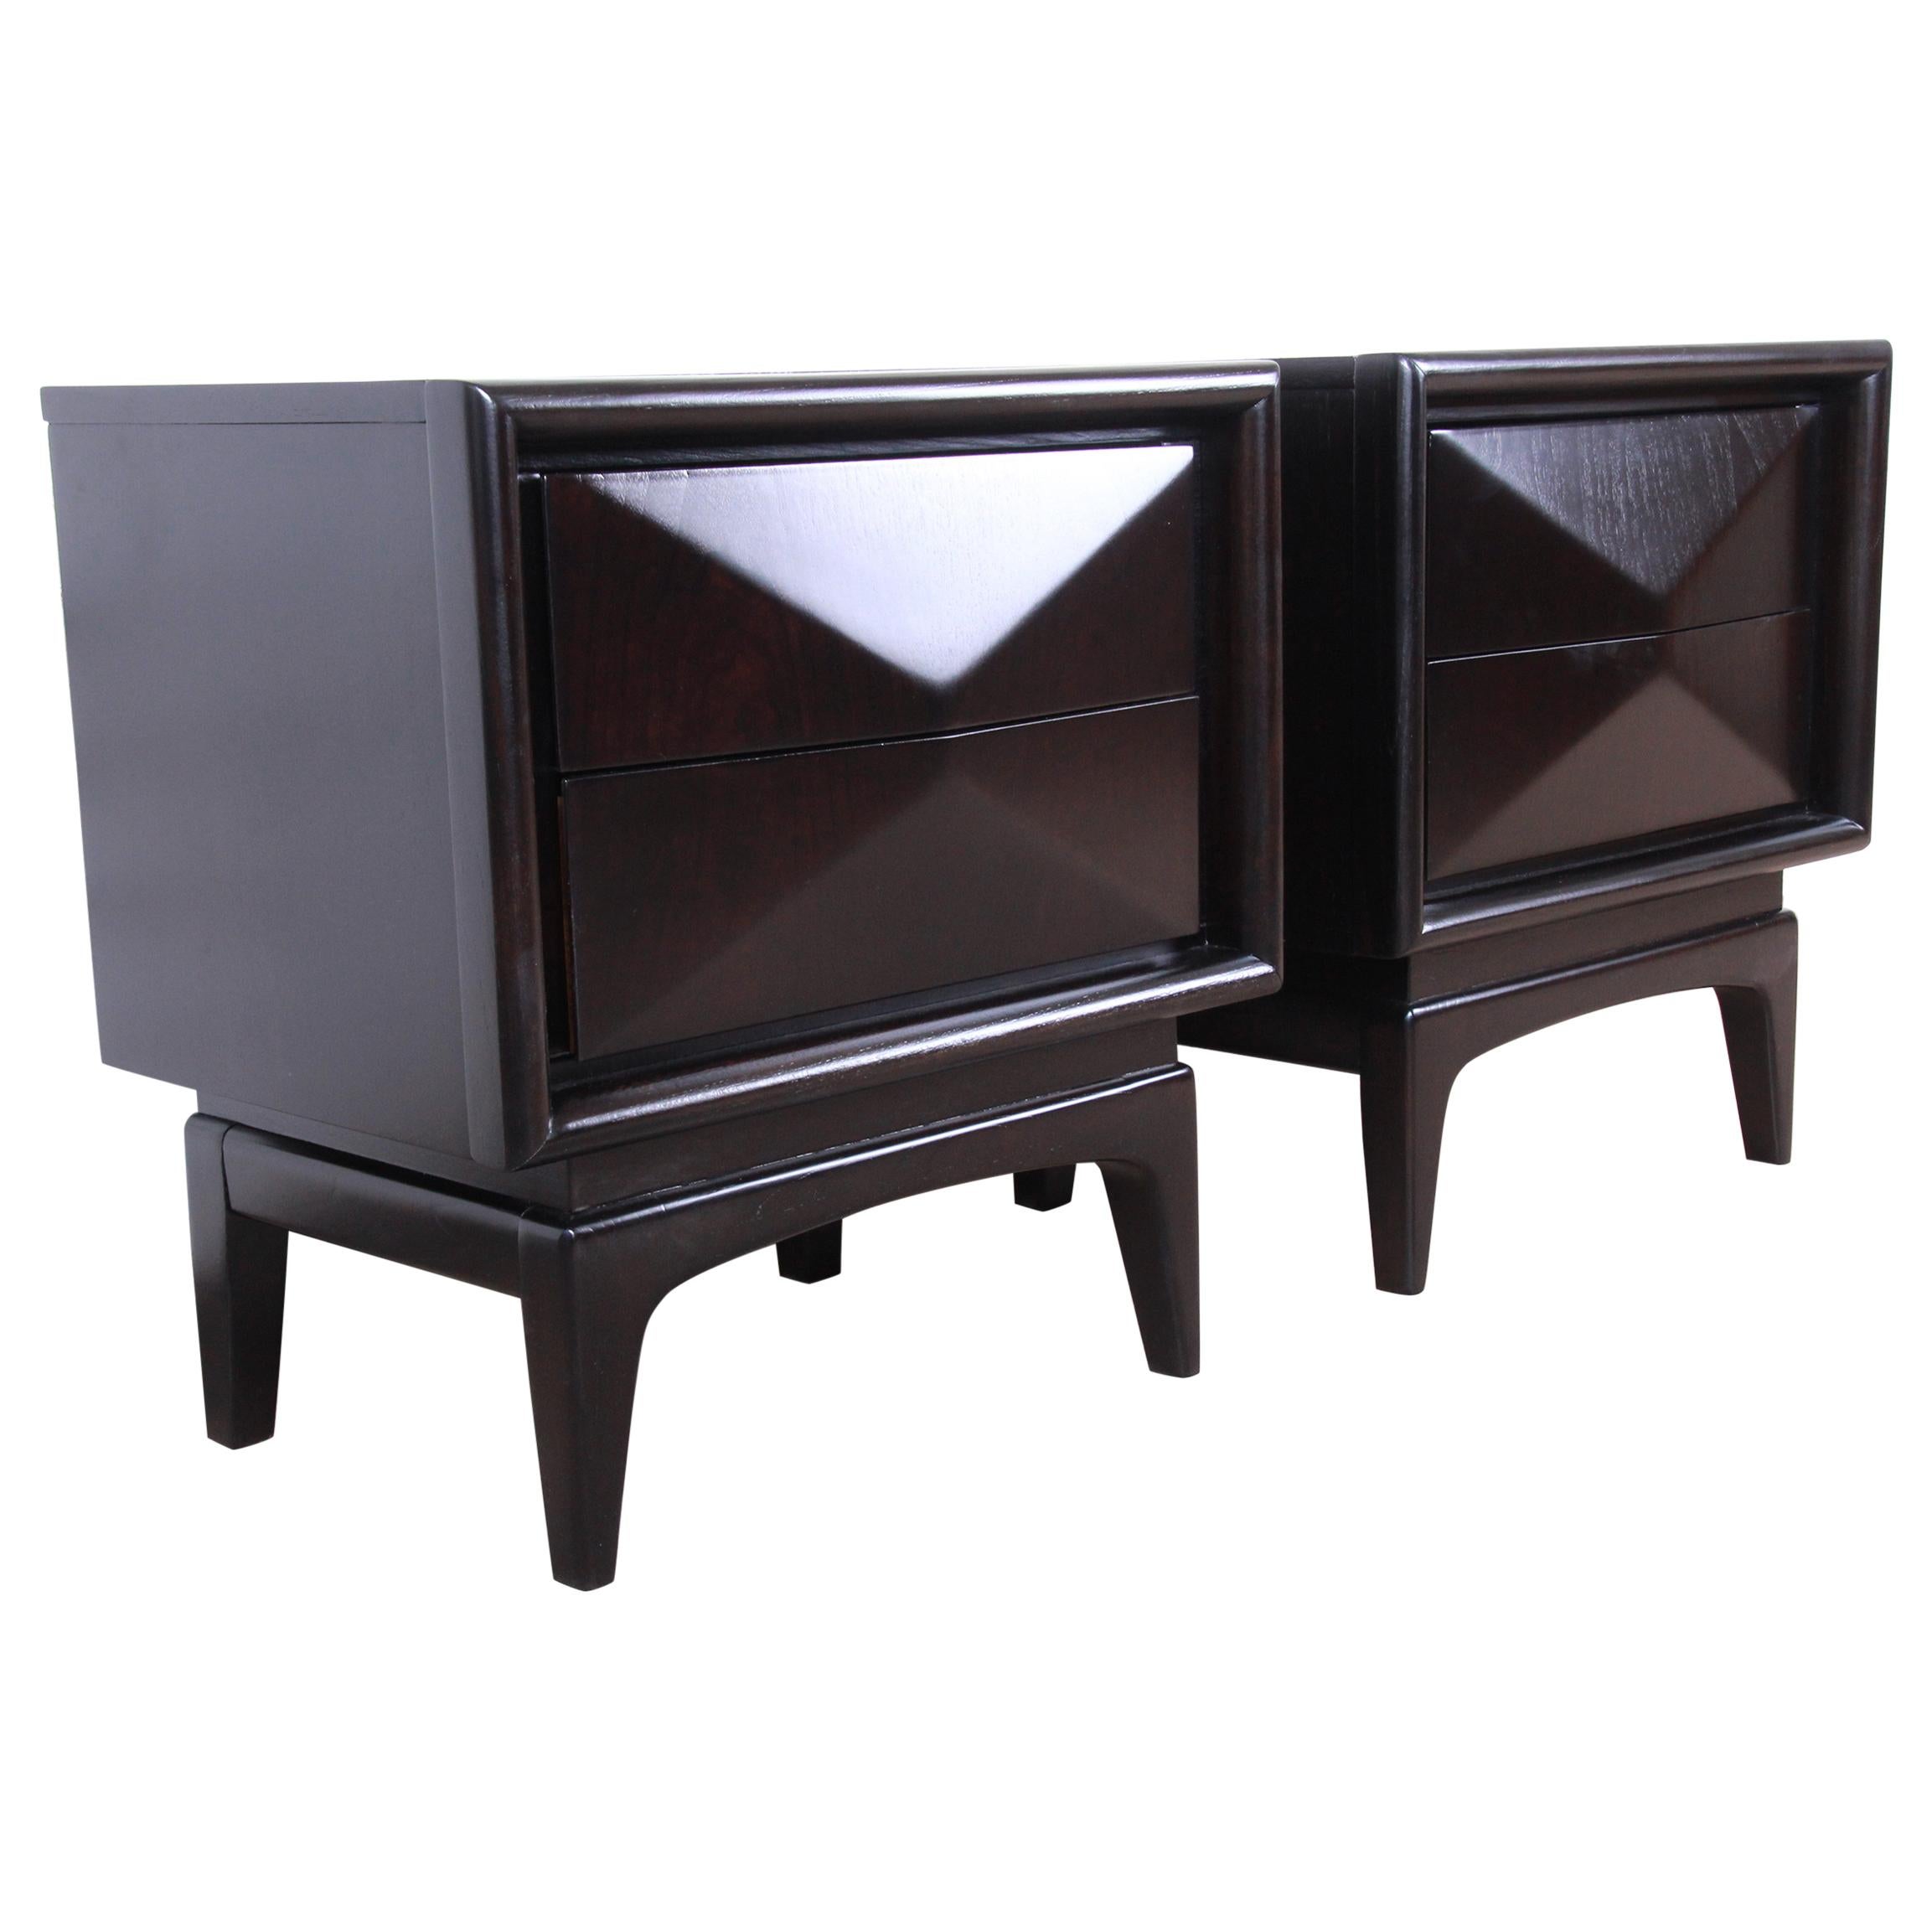 Mid-Century Modern Ebonized Diamond Front Nightstands by United, Refinished